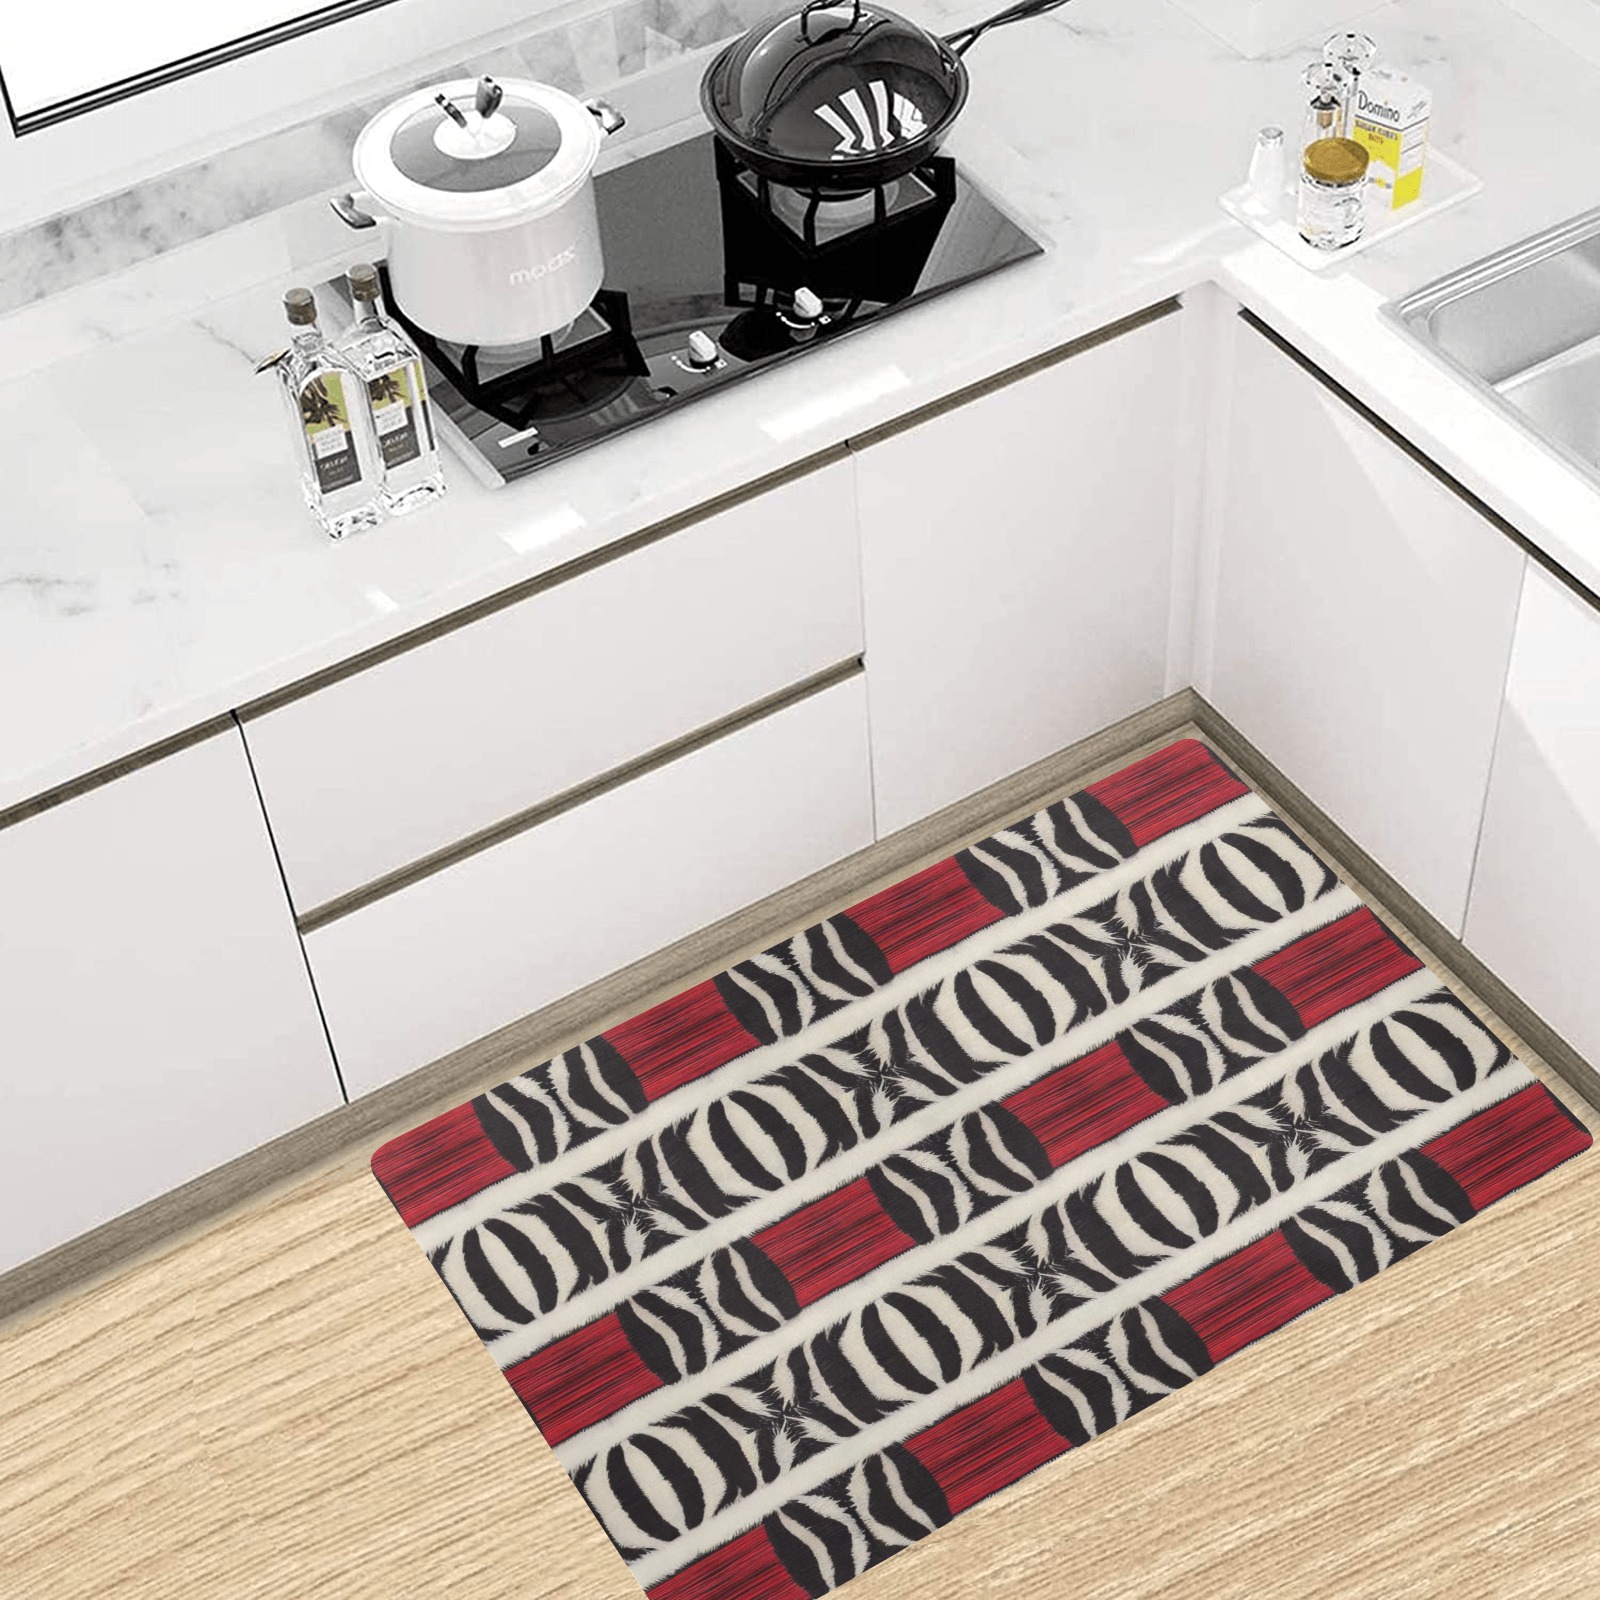 repeating pattern black and white zebra print with red Kitchen Mat 32"x20"